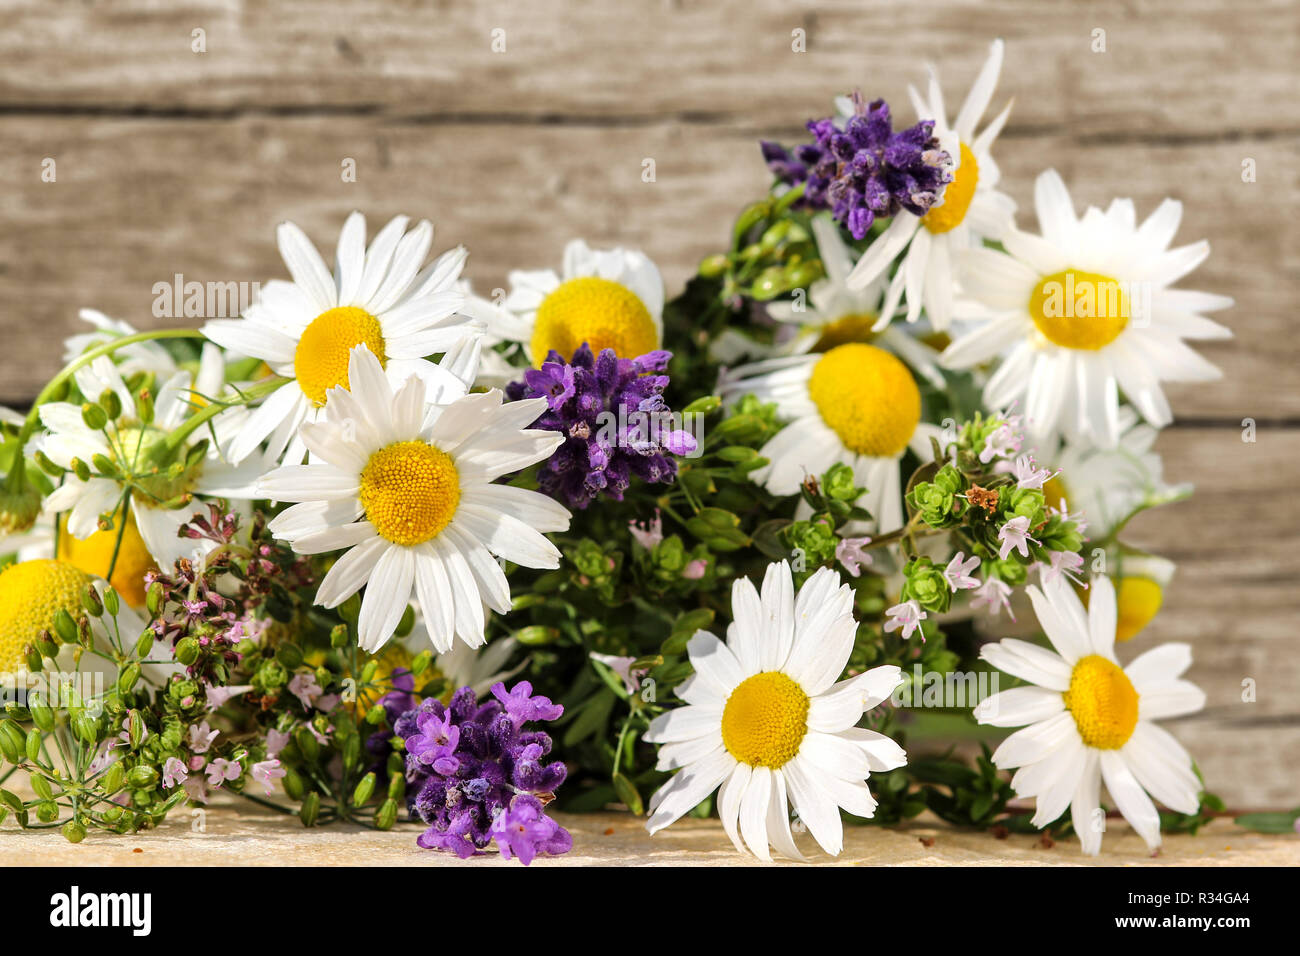 homeopathy with herbs and medicinal plants Stock Photo